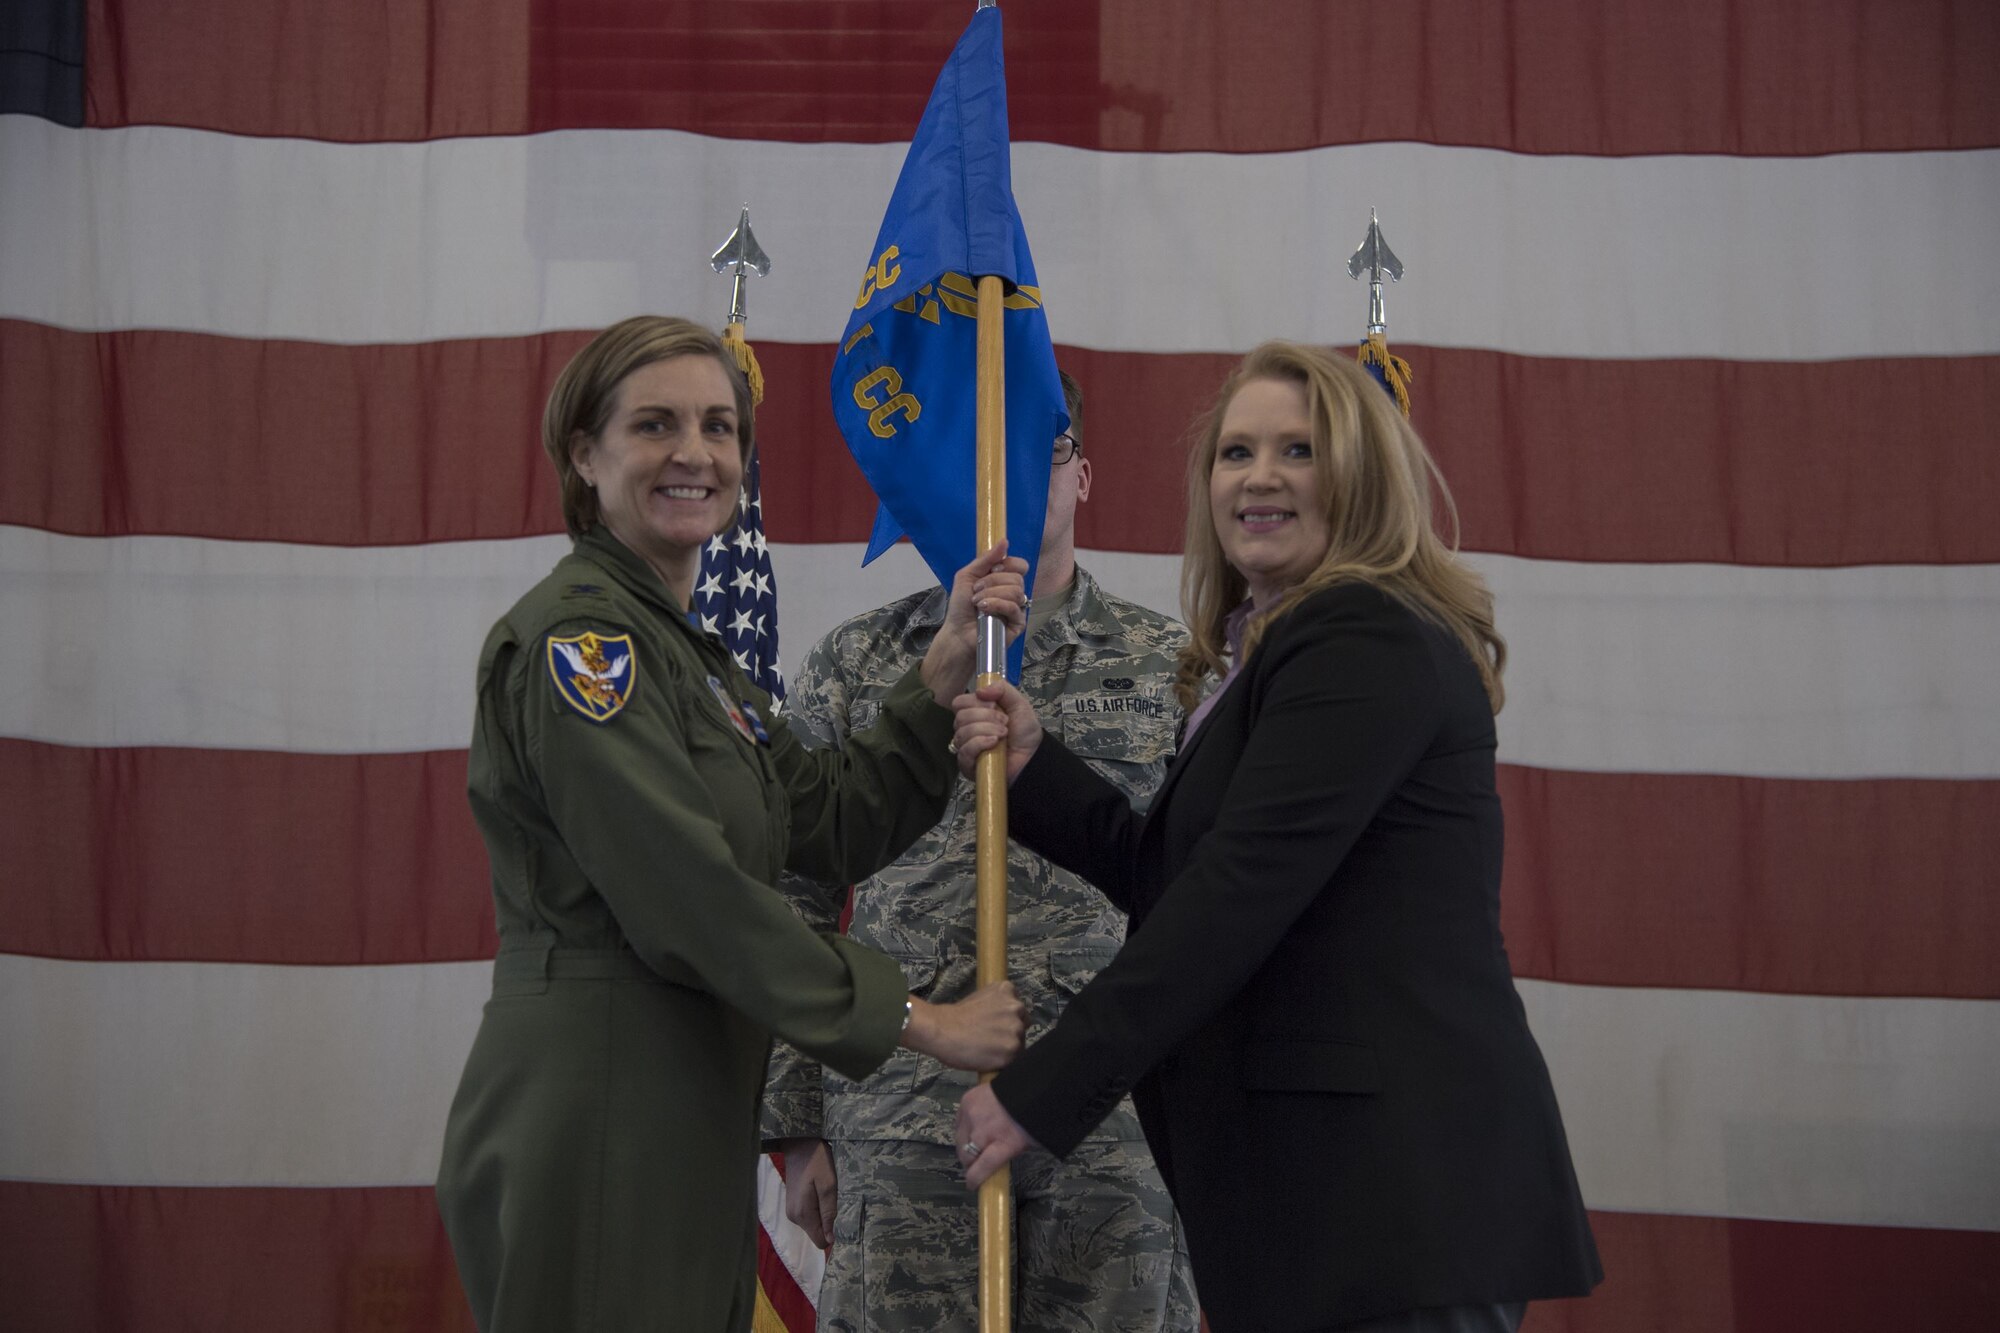 Col. Jennifer Short, 23d Wing commander, hands Paige Dukes, incoming 23d WG honorary commander, the guidon during an Honorary Commander Change of Command ceremony at Moody Air Force Base, Ga., Jan. 26, 2018. The Honorary Commander Program allows local community leaders to gain awareness of Moody’s mission through official and social functions. (U.S. Air Force photo by Staff Sgt. Olivia Dominique)